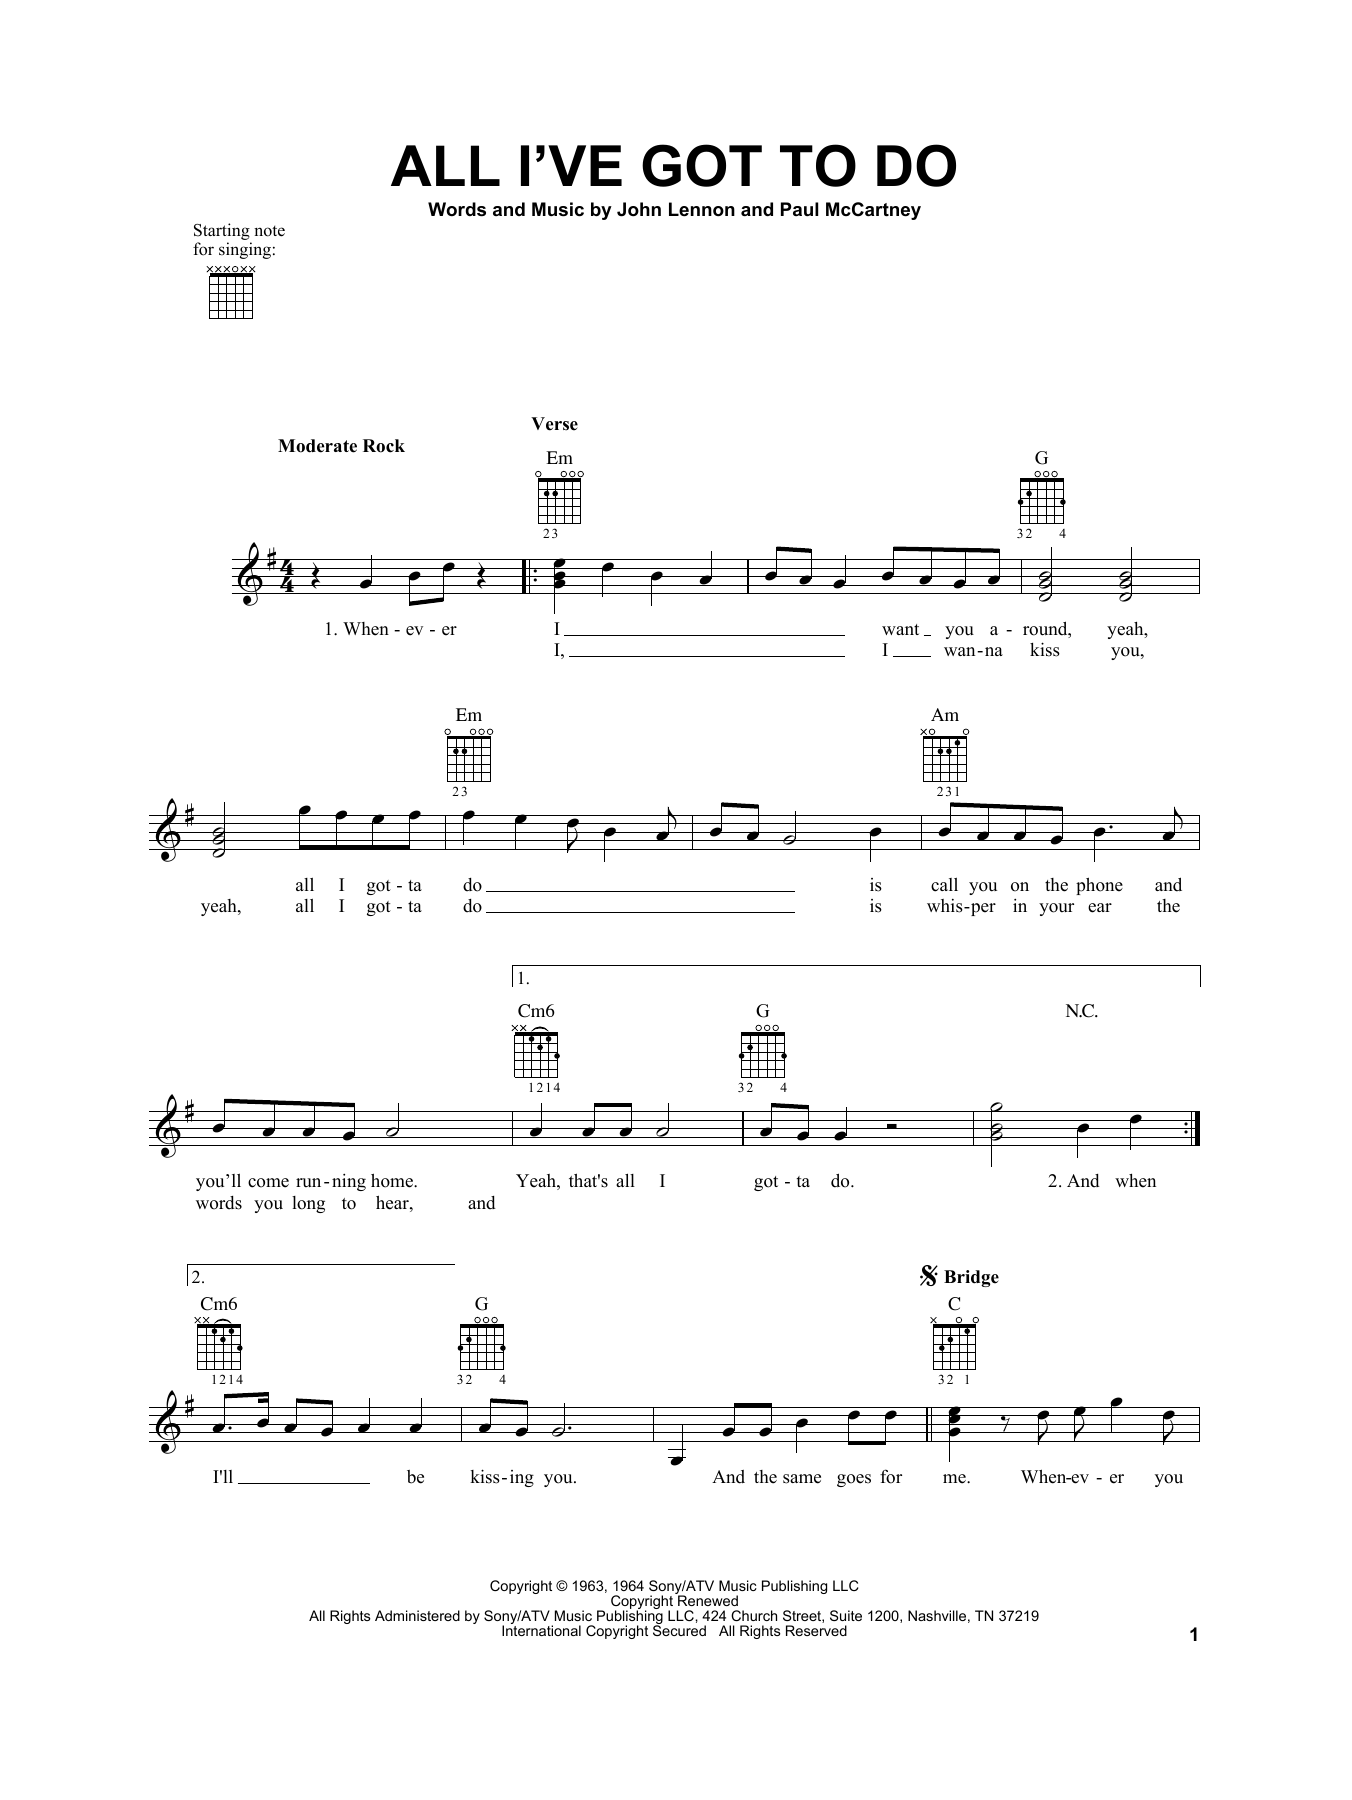 Download The Beatles All I've Got To Do Sheet Music